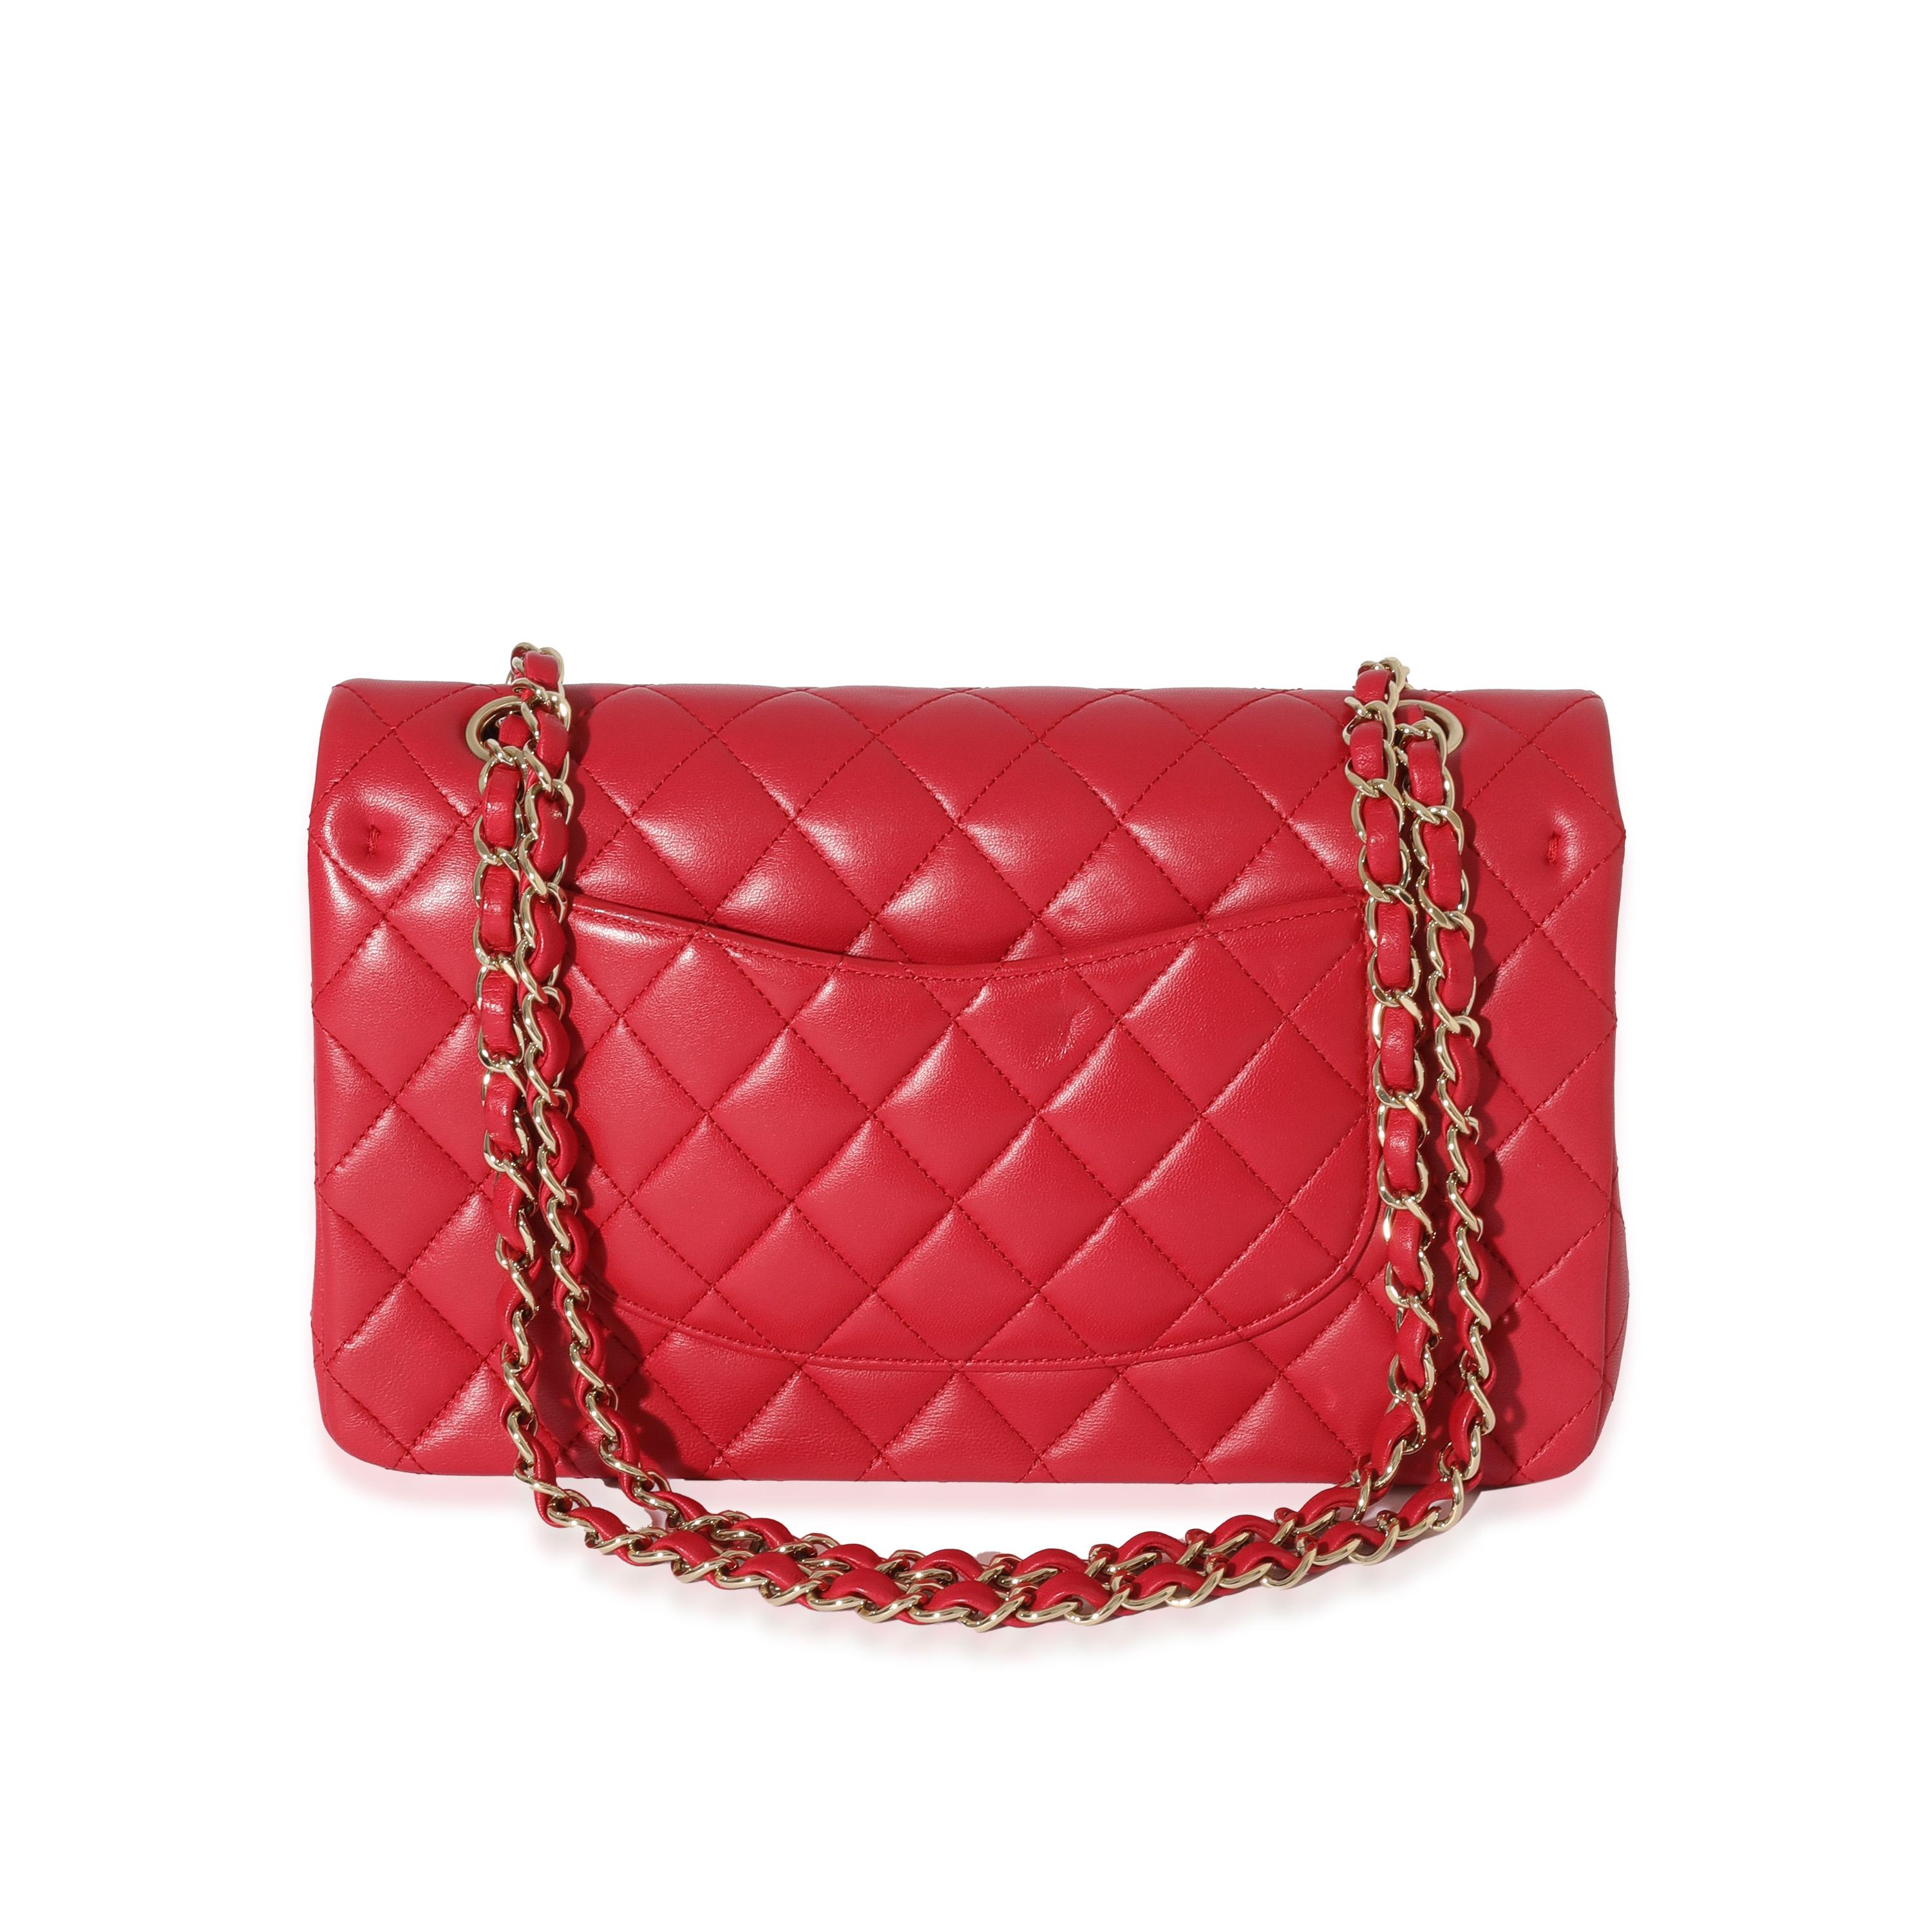 Chanel Dark Pink Lambskin Medium Flap Bag In Excellent Condition For Sale In New York, NY